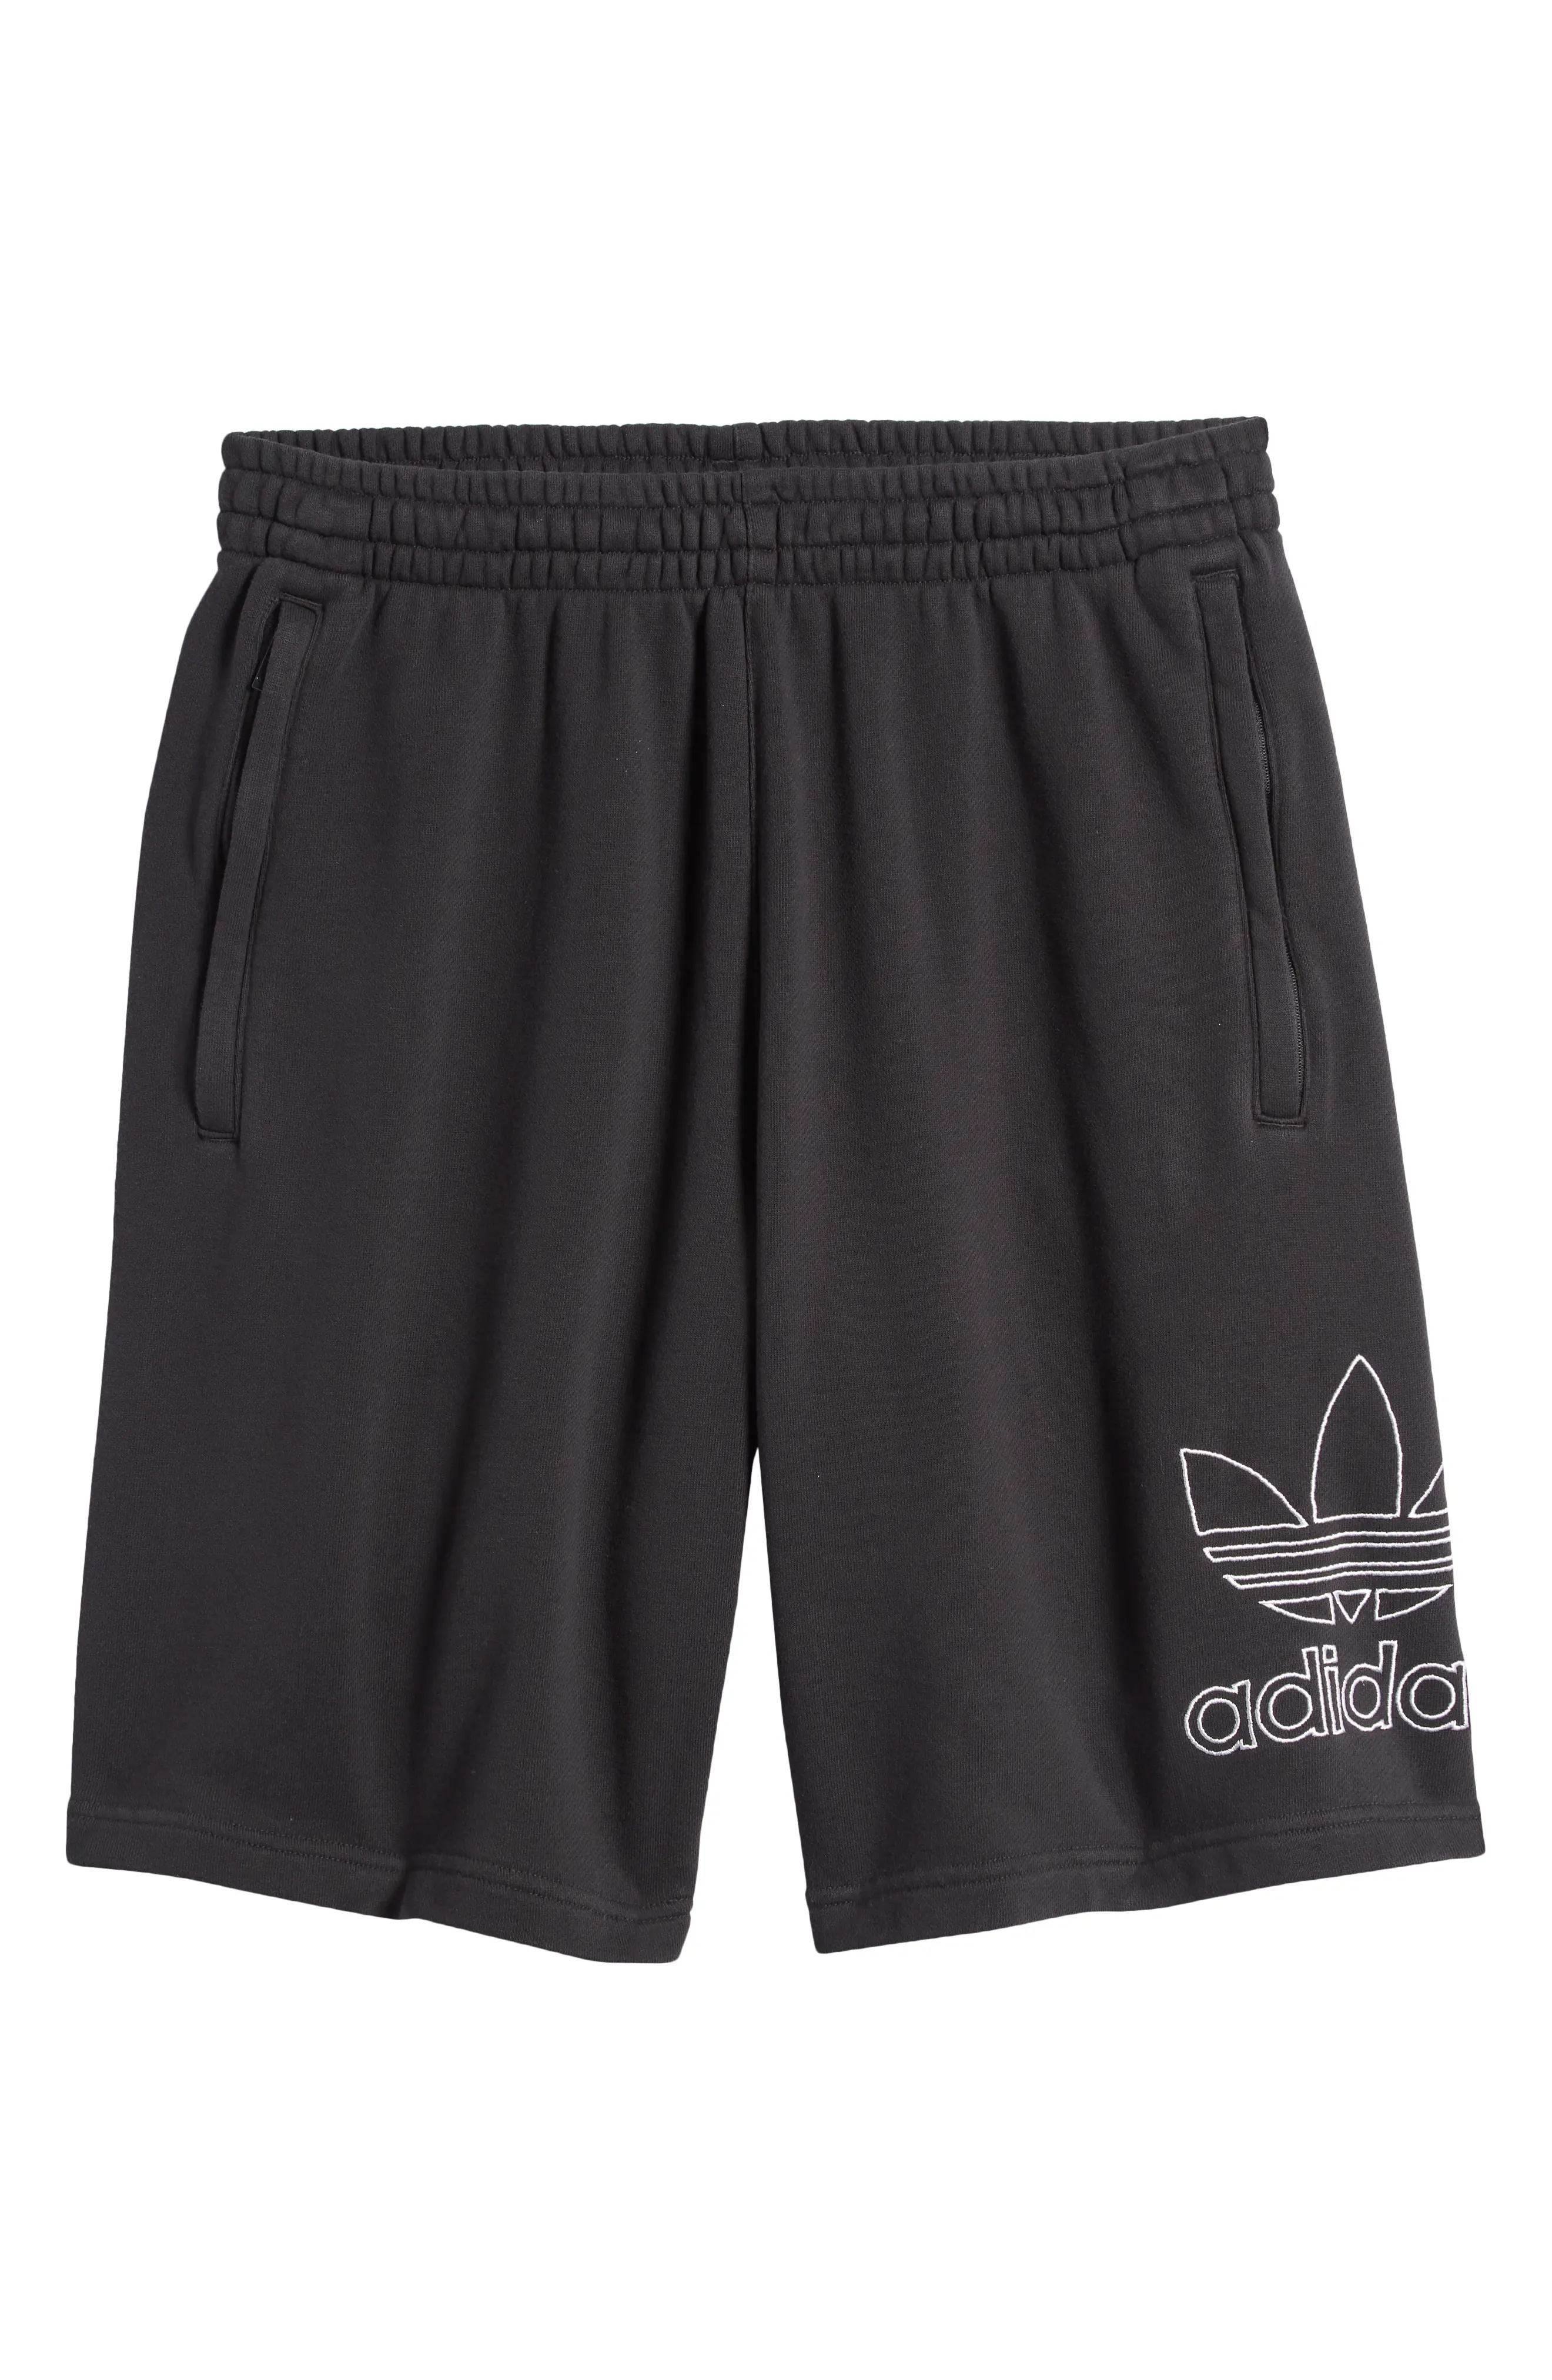 Trefoil Embroidered Sweat Shorts in Black/White - 5